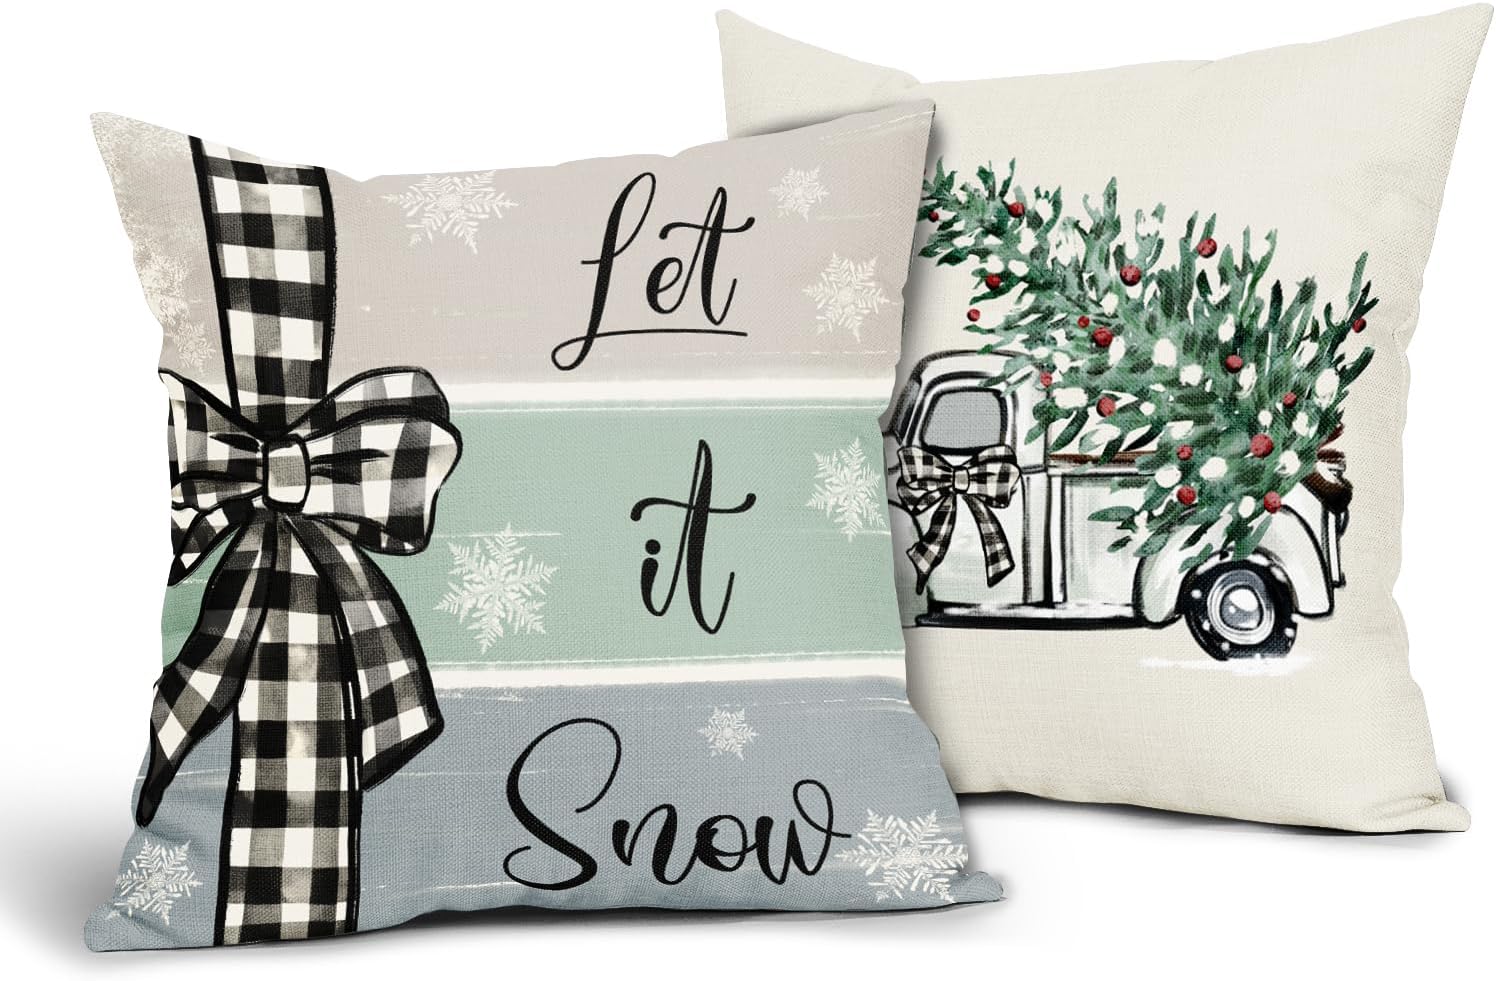 Christmas Decorations Pillow Covers 18x18 Inch Set of 2 Striped Buffalo Plaid Throw Pillow Covers Winter Tree Truck Snow Pillowscase Cotton Linen Cushion Covers for Sofa Couch Bedroom Home Decor